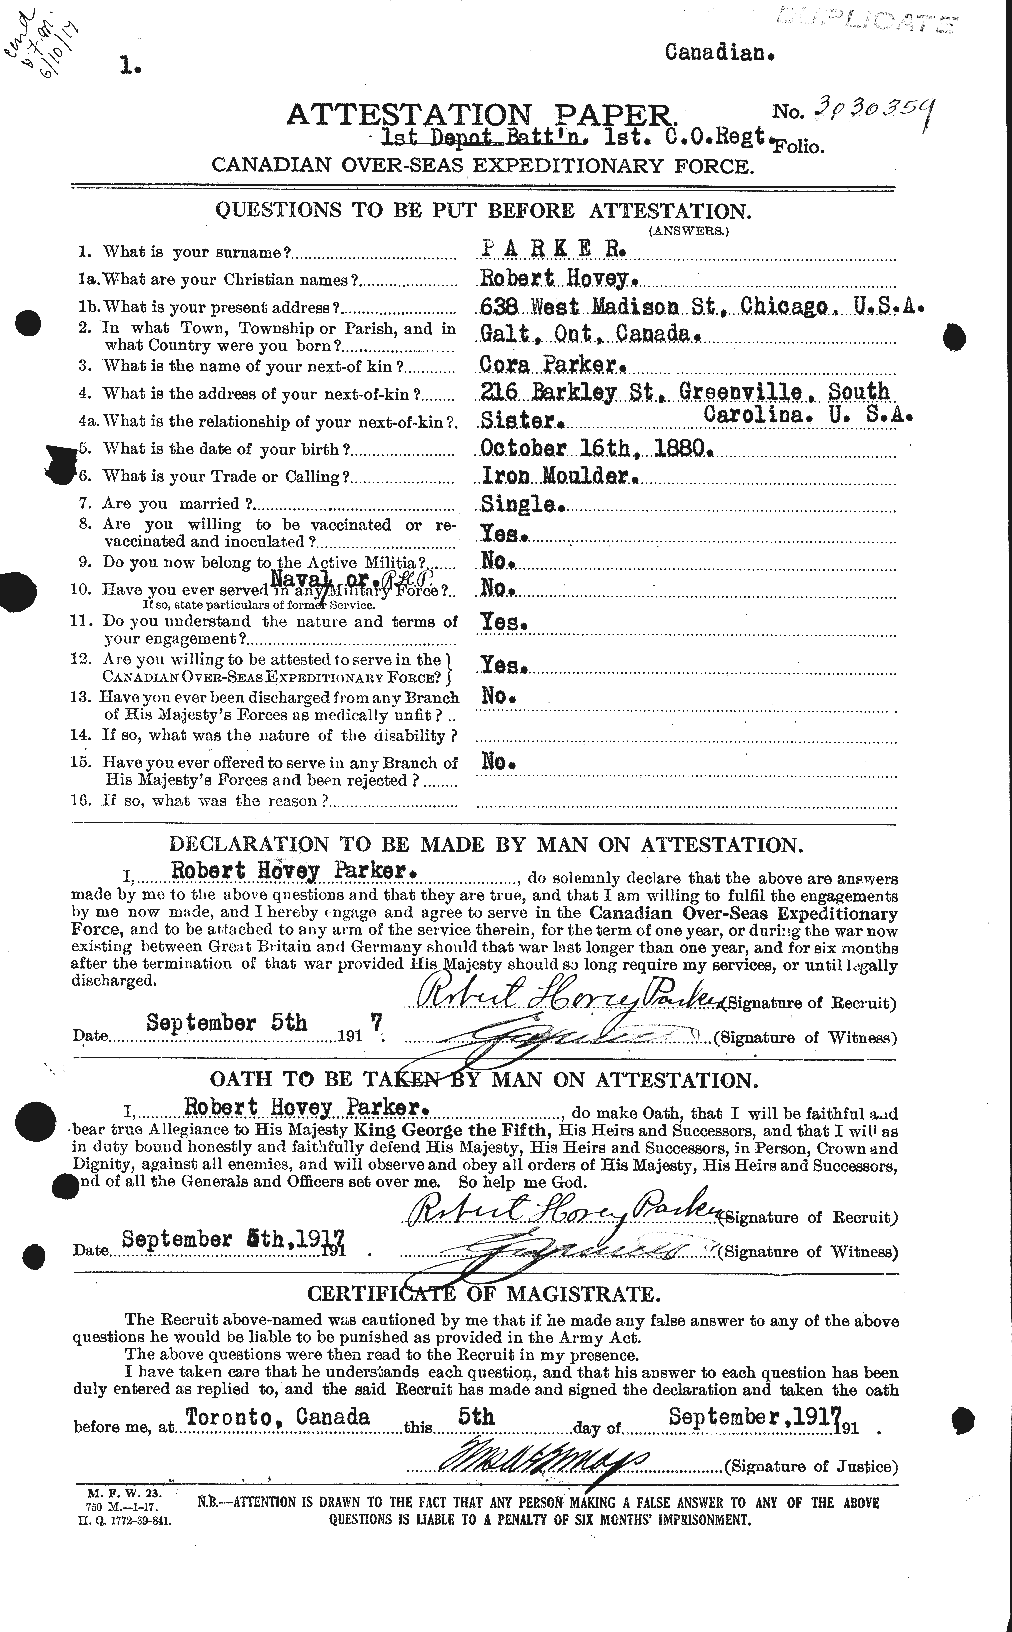 Personnel Records of the First World War - CEF 565605a